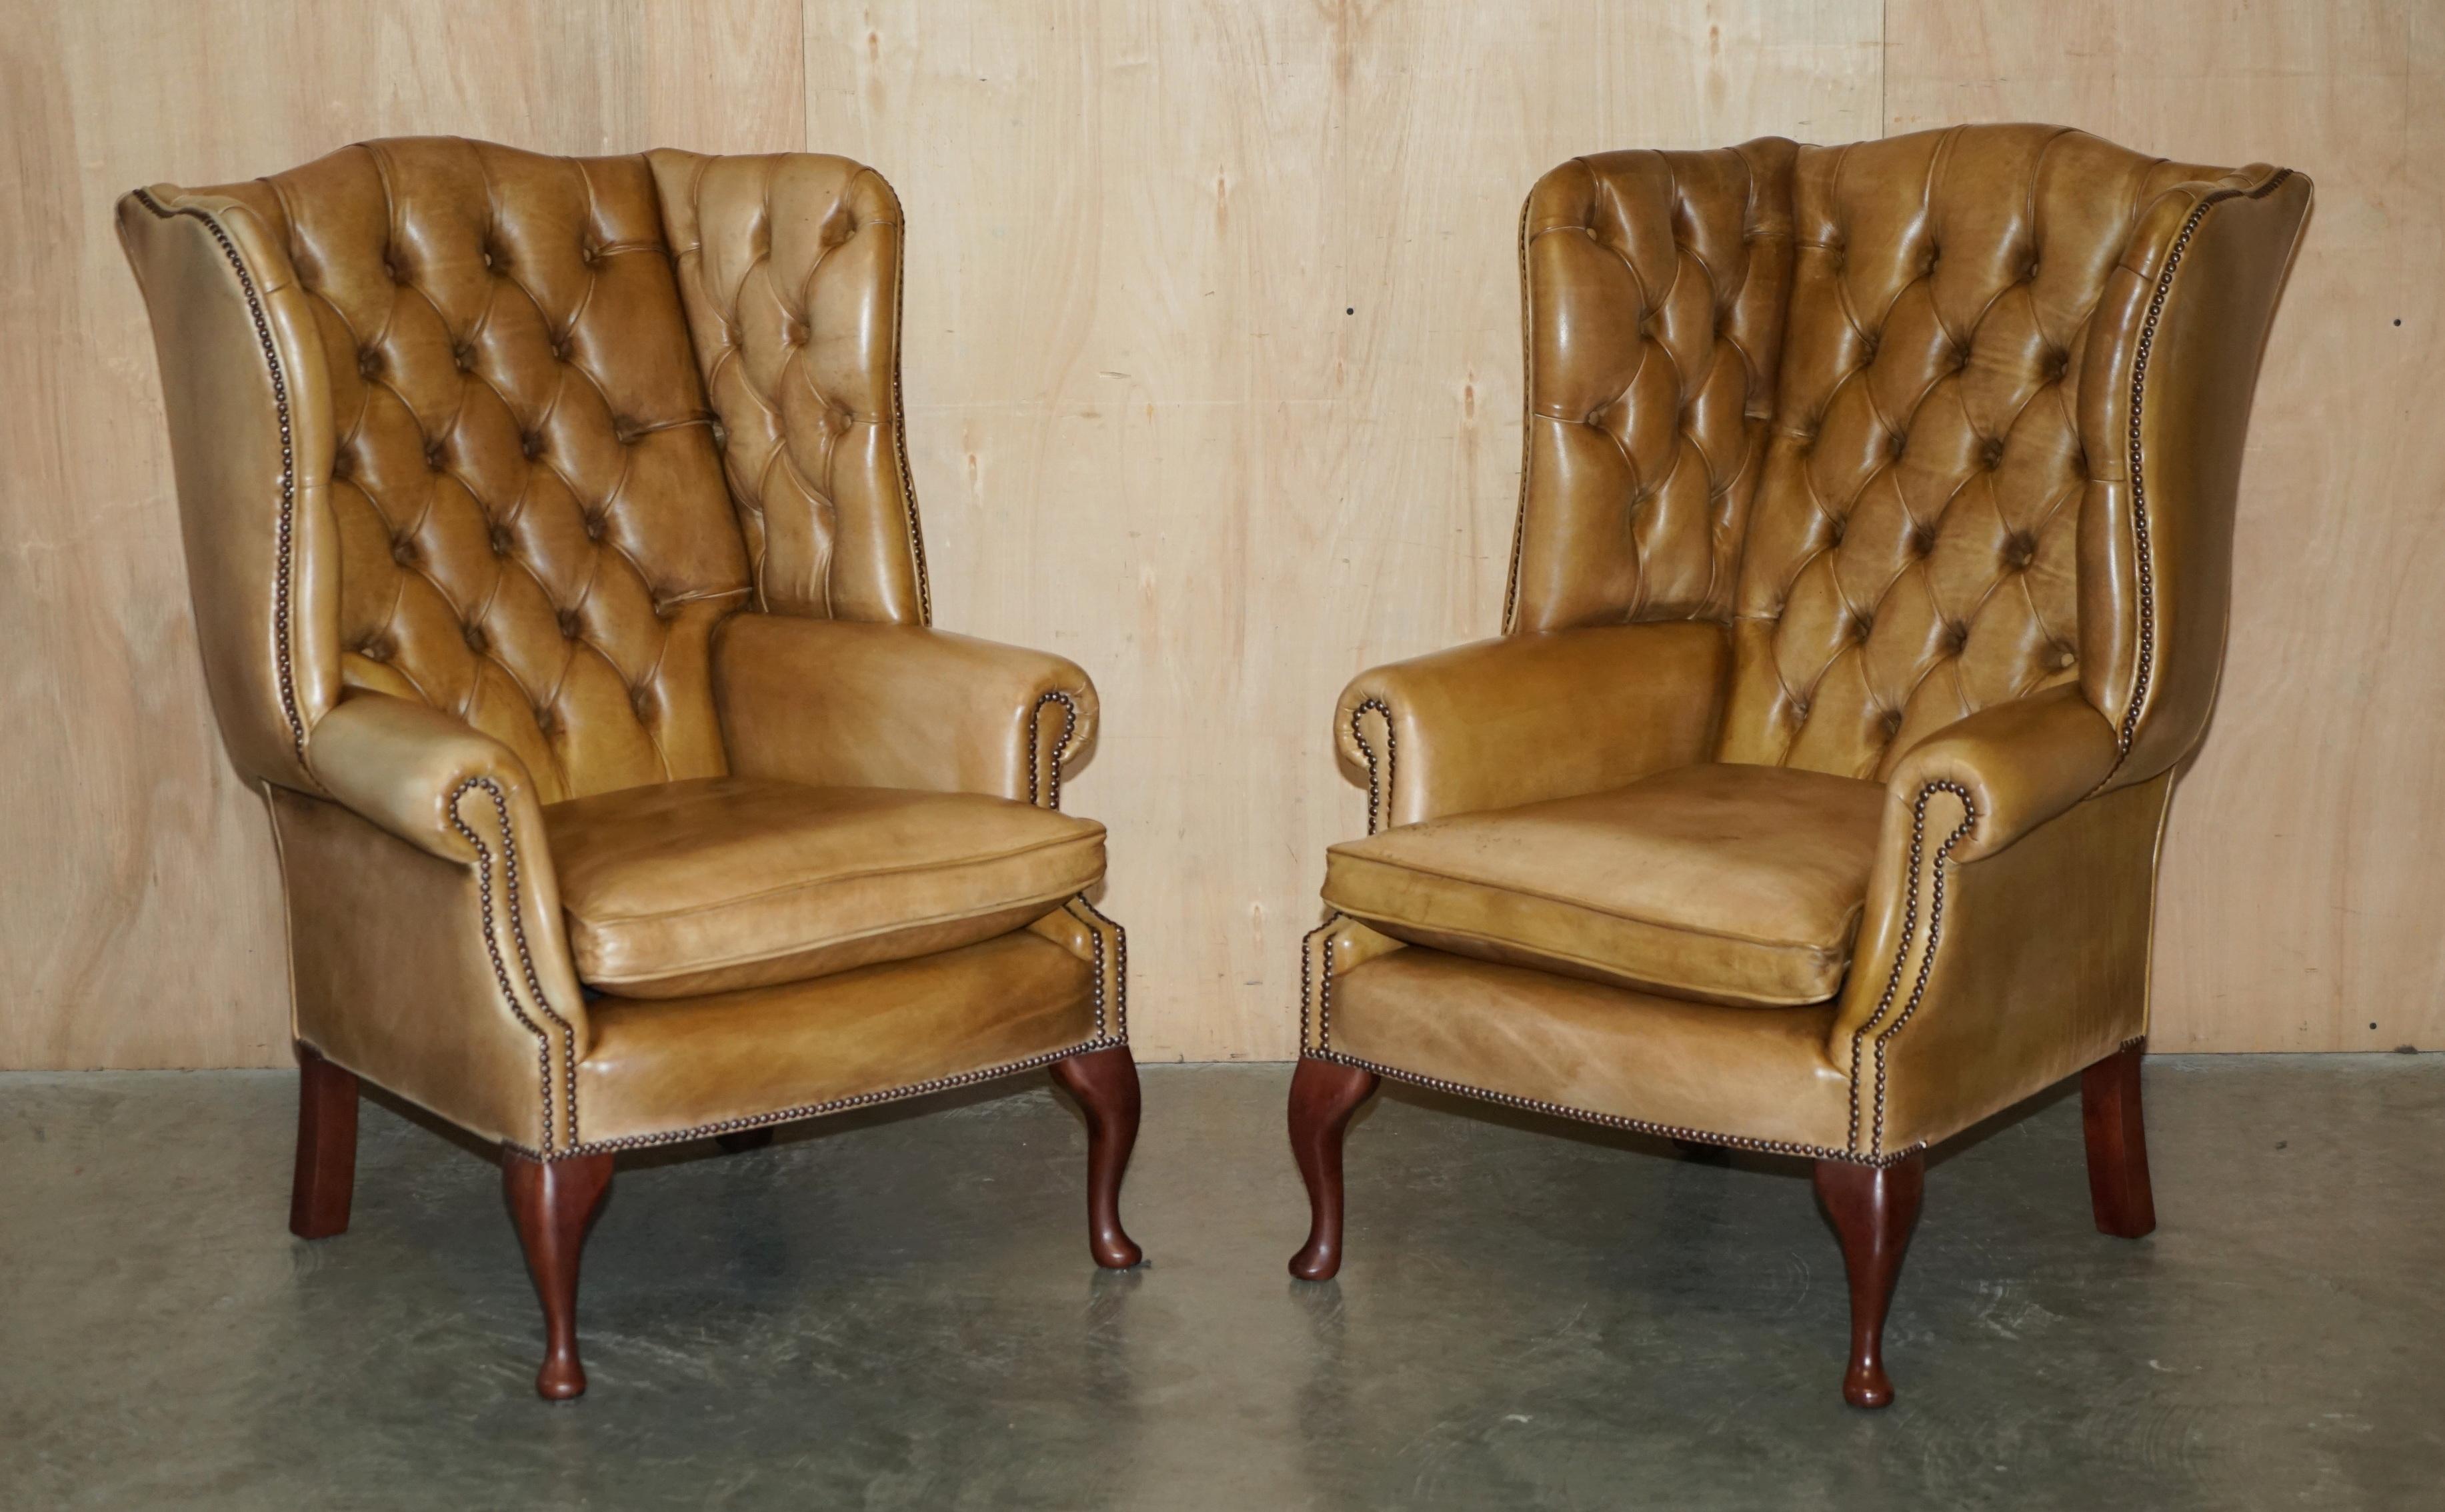 Royal House Antiques

Royal House Antiques is delighted to offer for sale this stunning, lightly restored pair of vintage Chesterfield tufted English wingback armchairs with custom made matching footstools which are part of a suite

Please note the